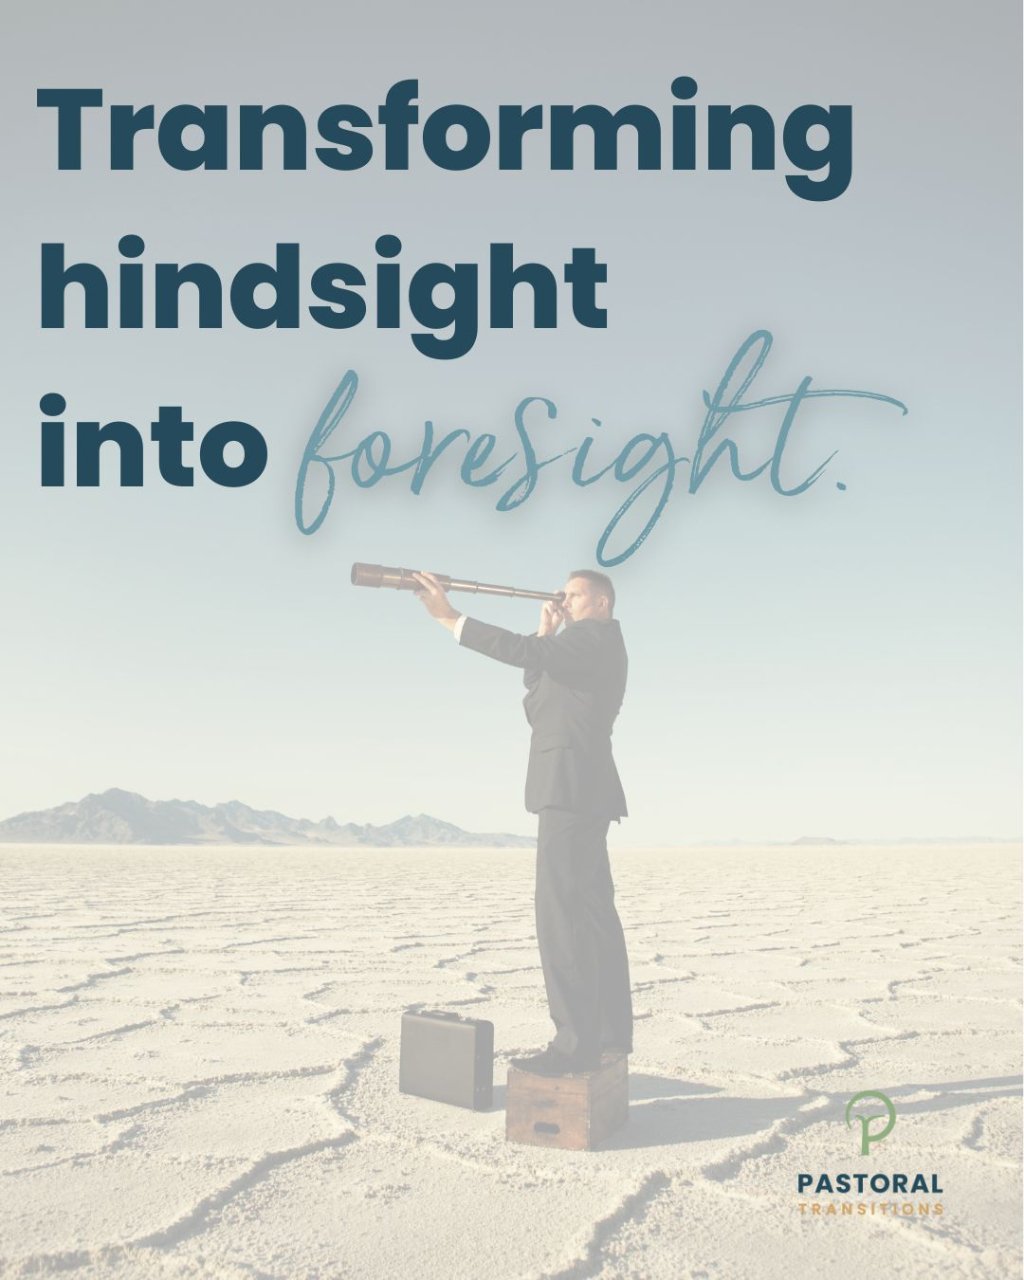 Too often, we only realize what we could've done better in hindsight. But what if we turned that hindsight into foresight?

Imagine a church that anticipates, plans, and navigates pastoral transitions with wisdom and heart.

That's the future we're b